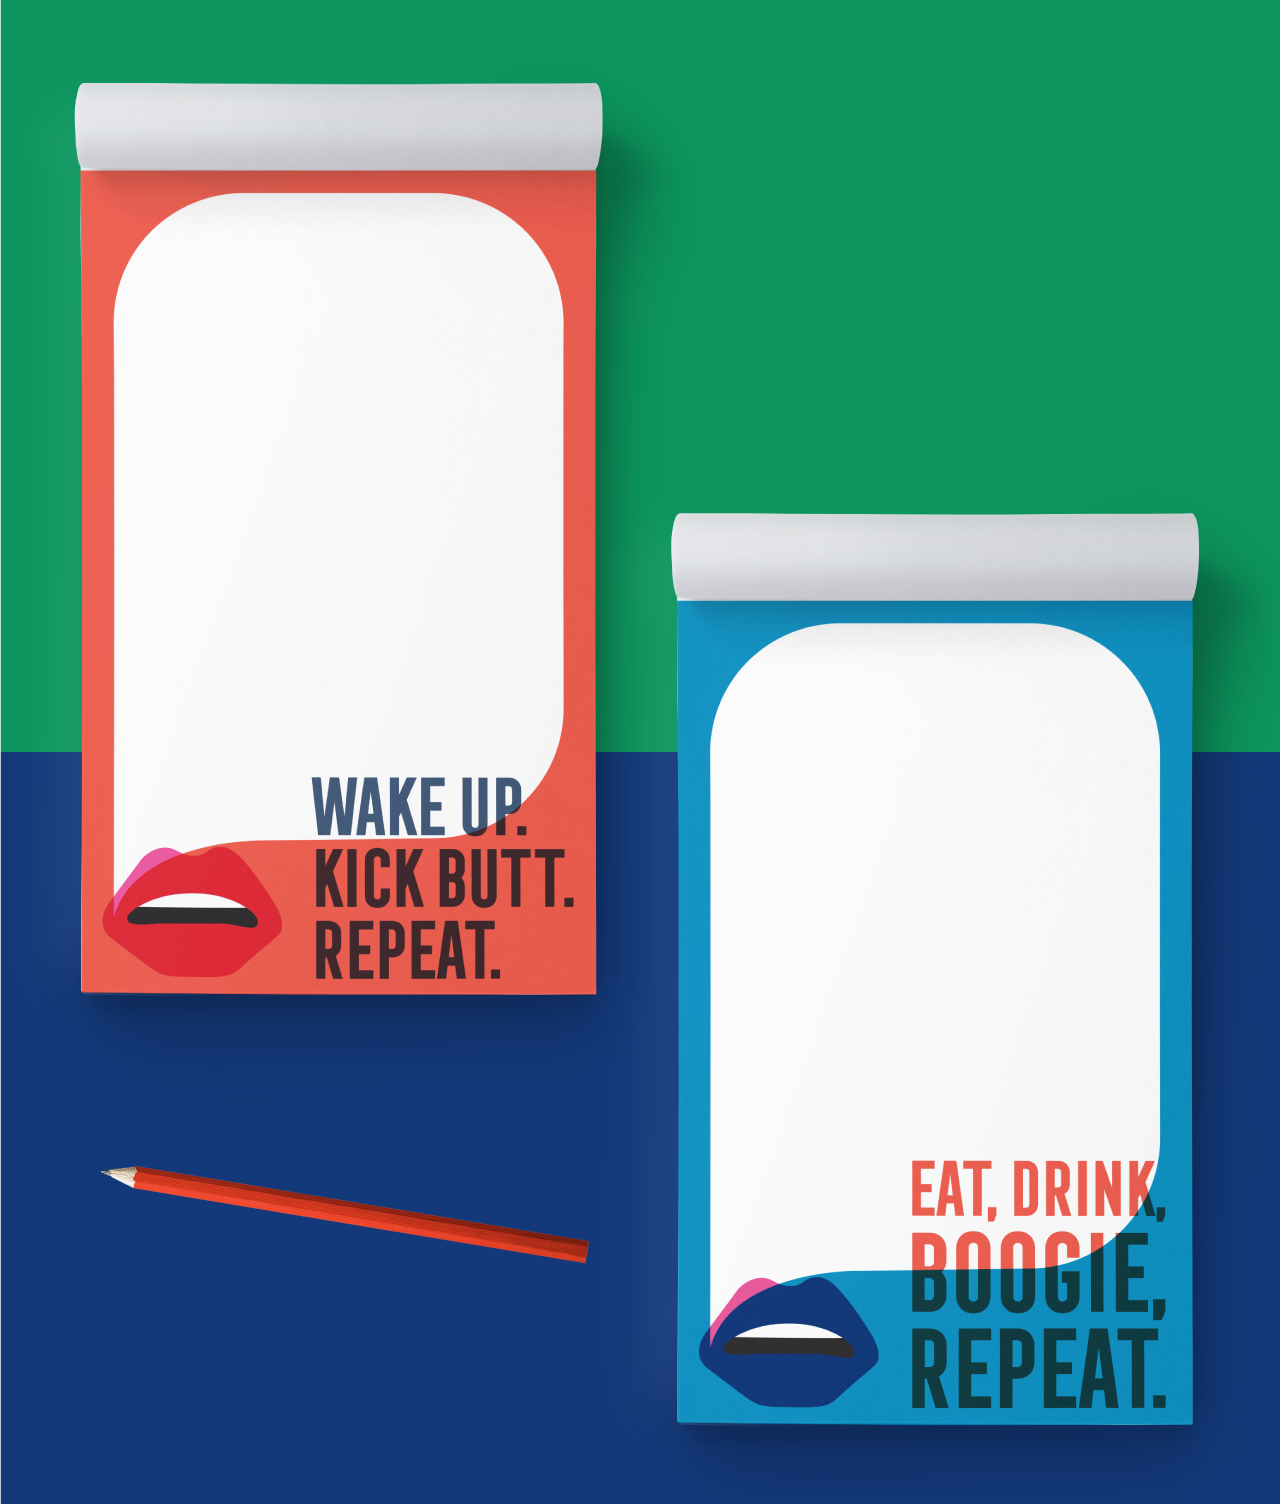 Coloful notepads. One with phrase, Wake Up. Kick Butt. Repeat. The other with phrase, Eat, Drink, Boogie, Repeat.